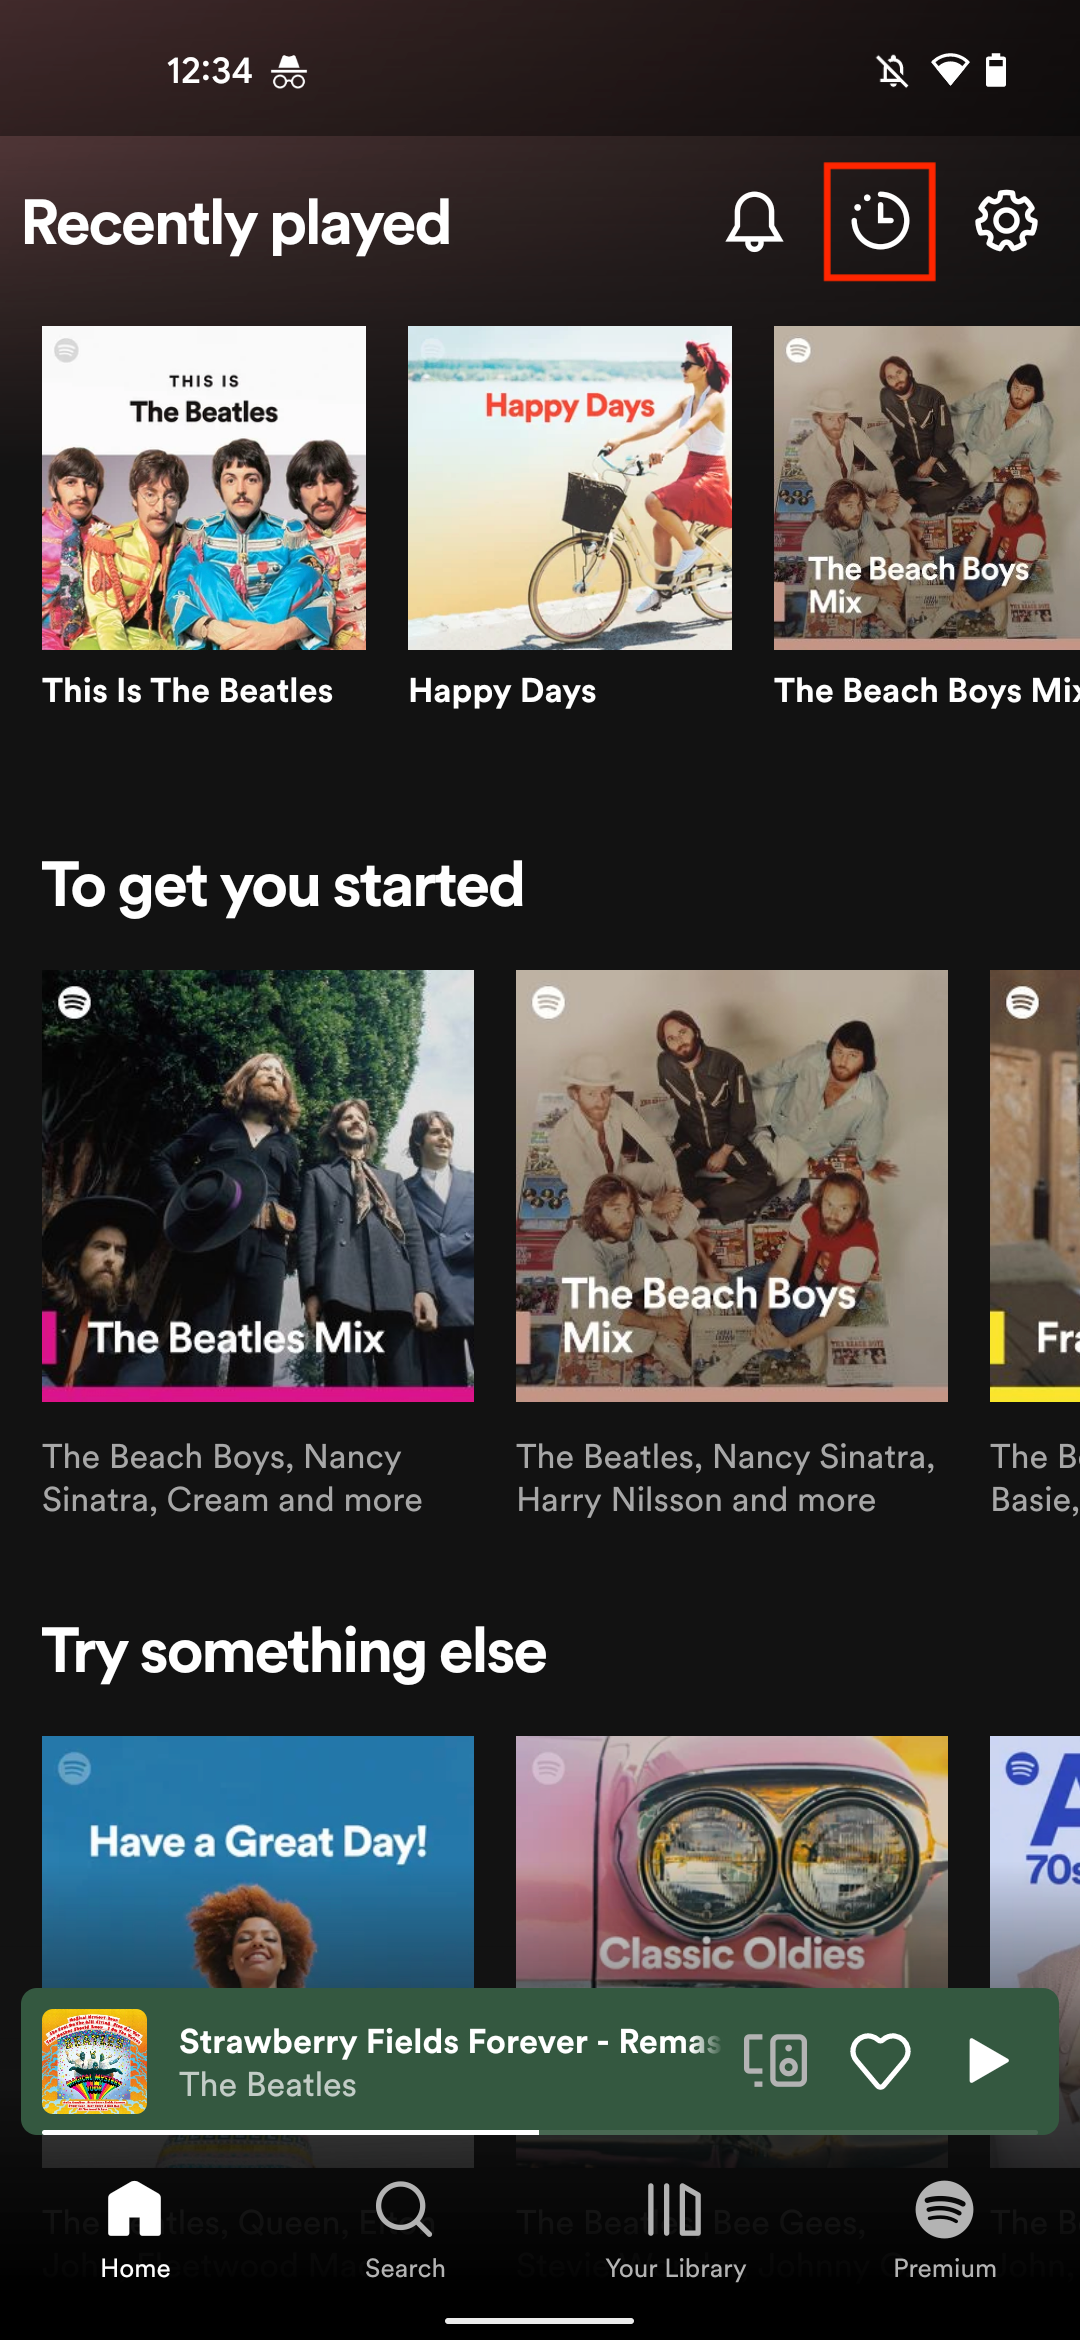 Spotify Android app screenshot showing recently played page